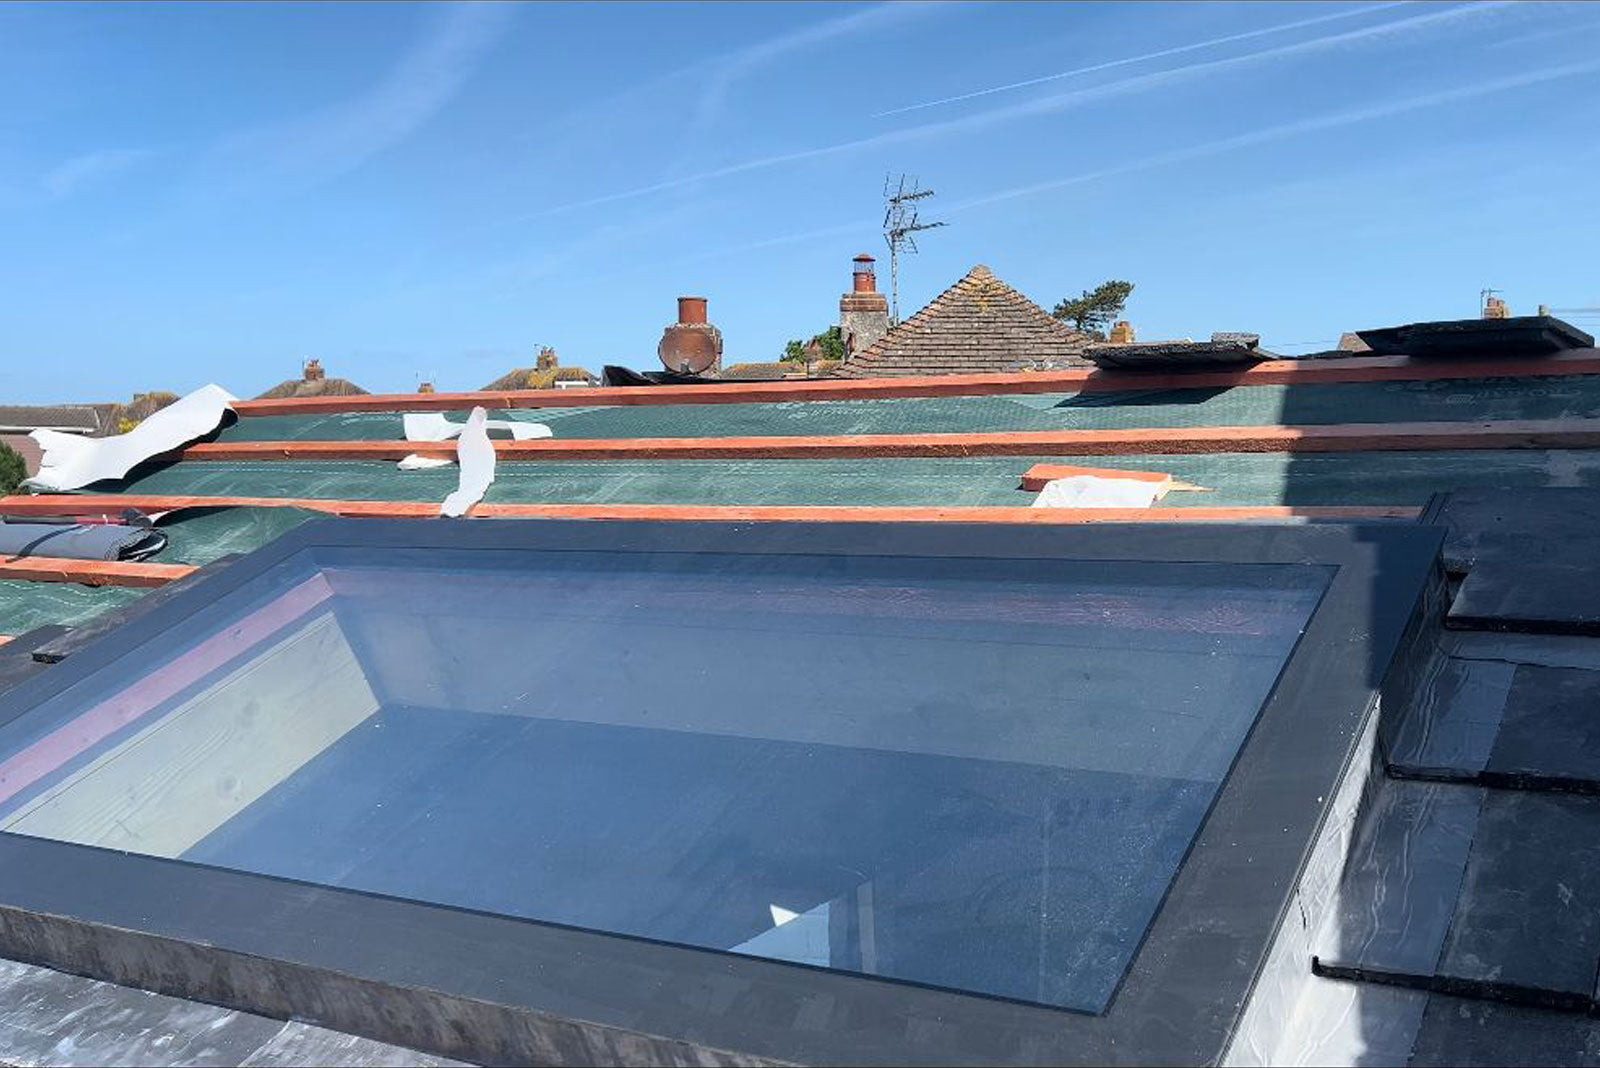 Pitched Roof Skylight 500 x 1500mm